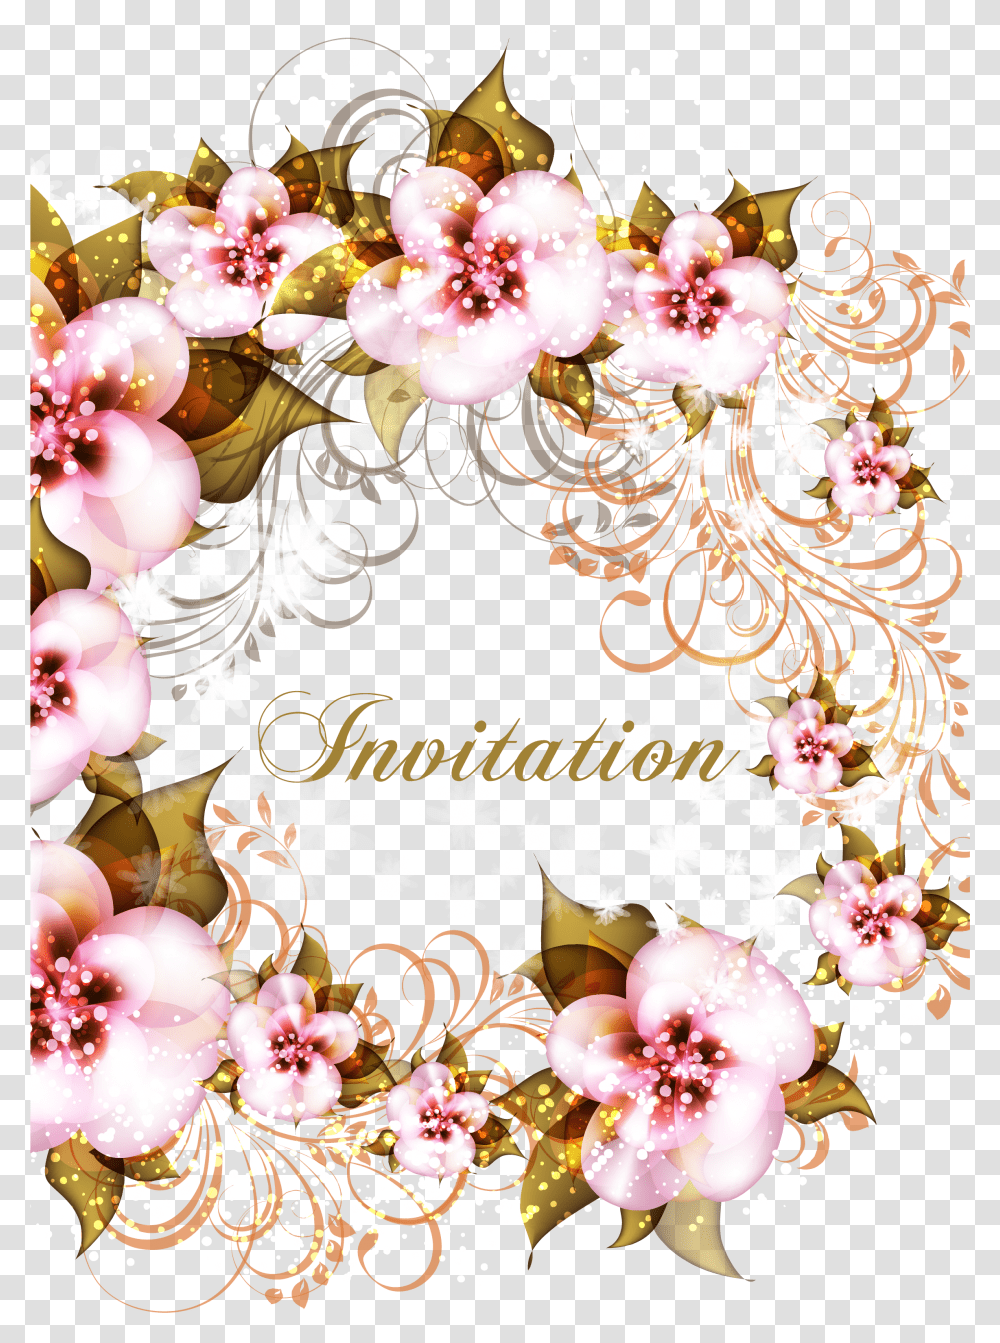 Image Royalty Free Download Flower Pink Floral Invitations Invitations Wedding Transparent Png